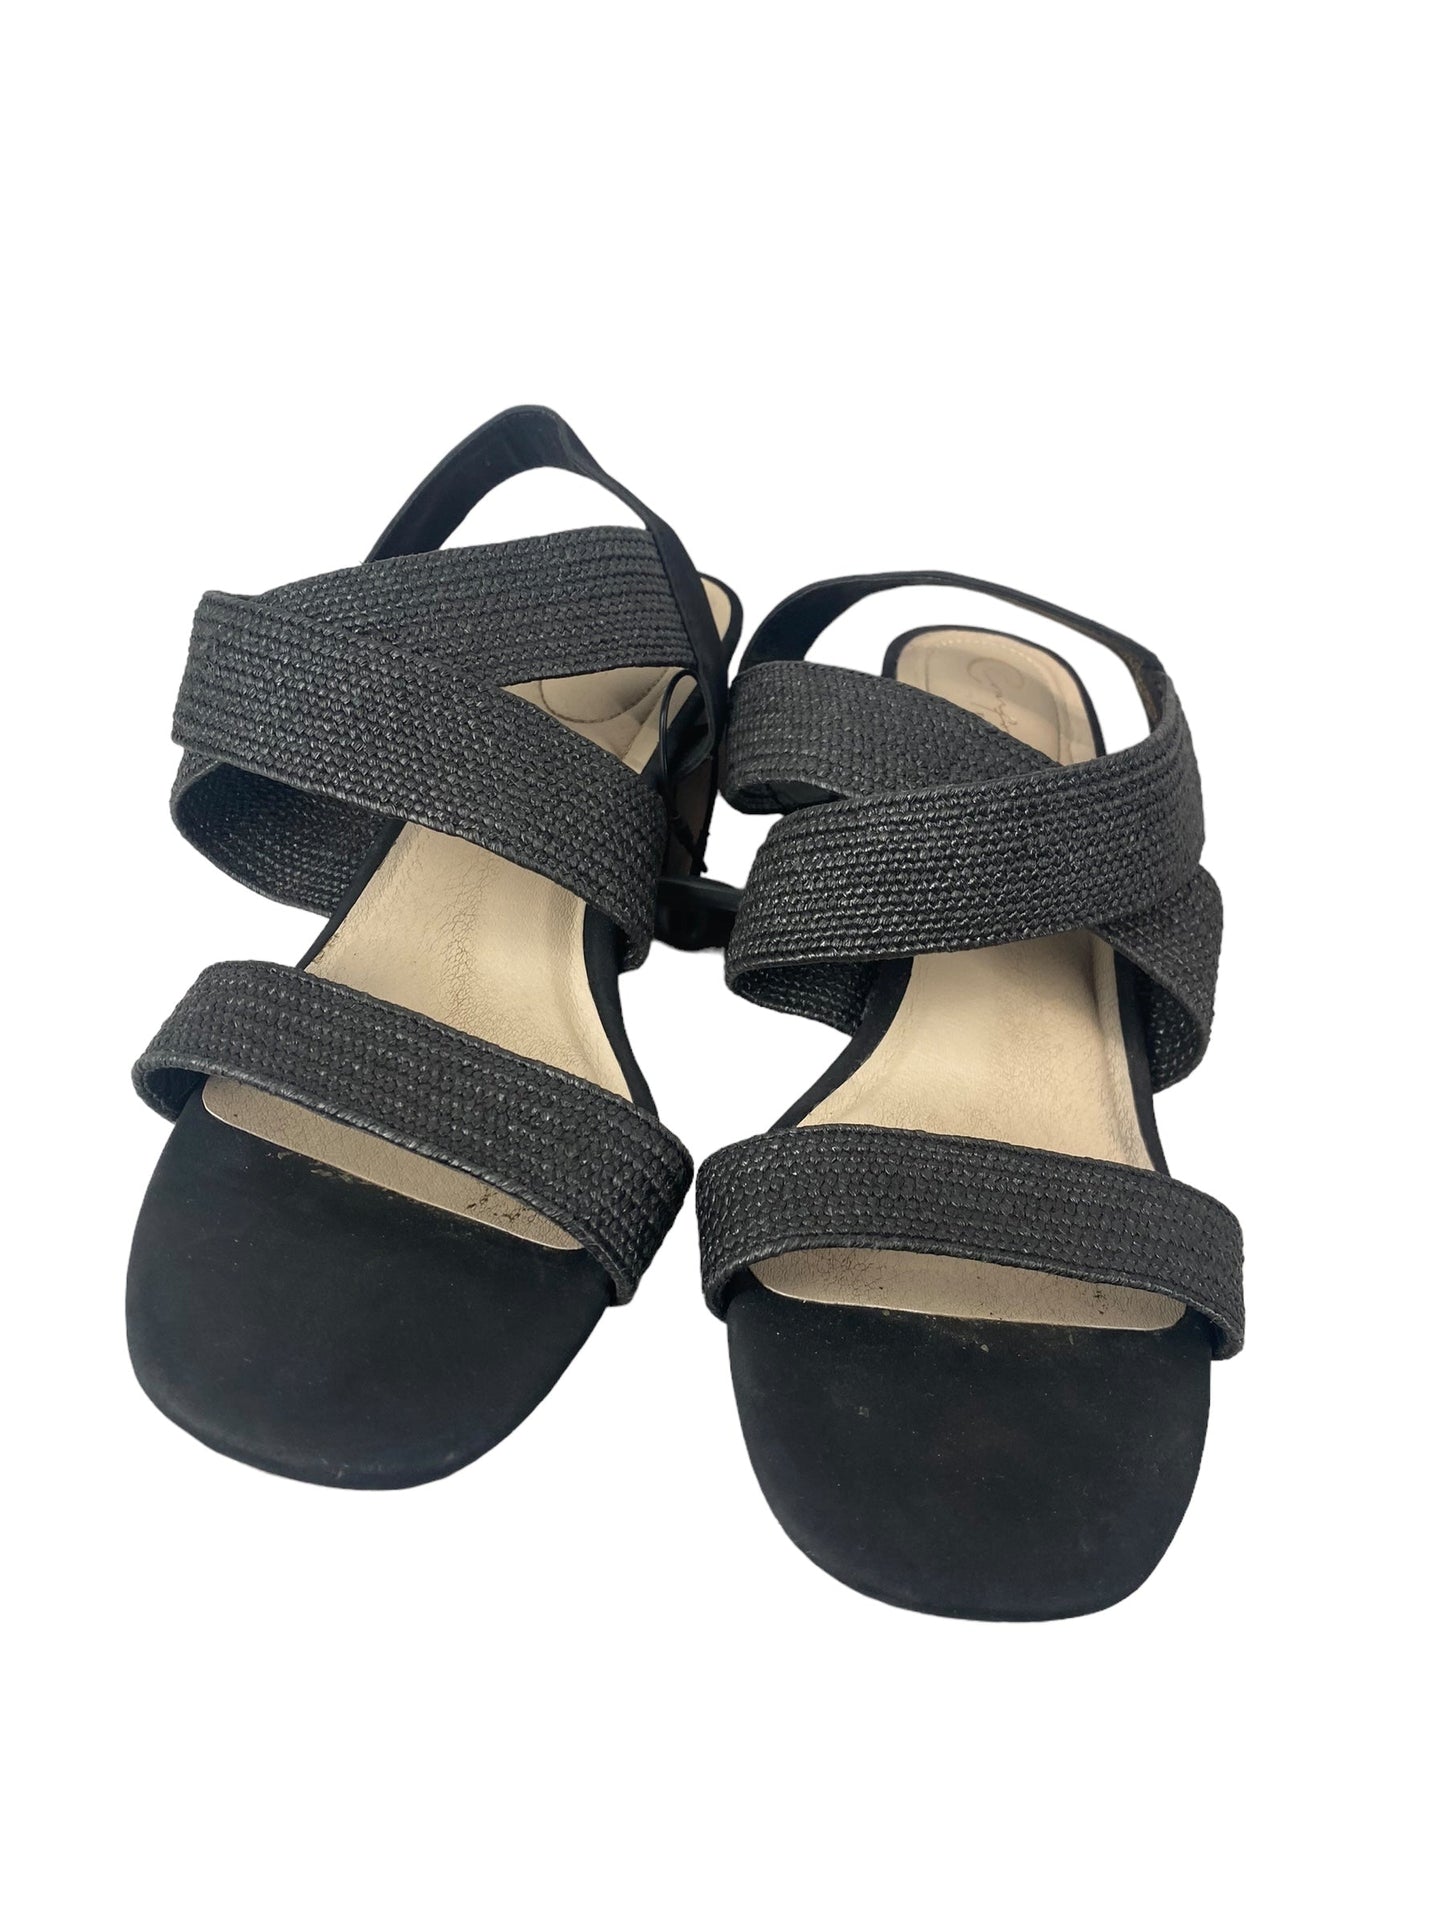 Sandals Heels Block By Cato  Size: 11